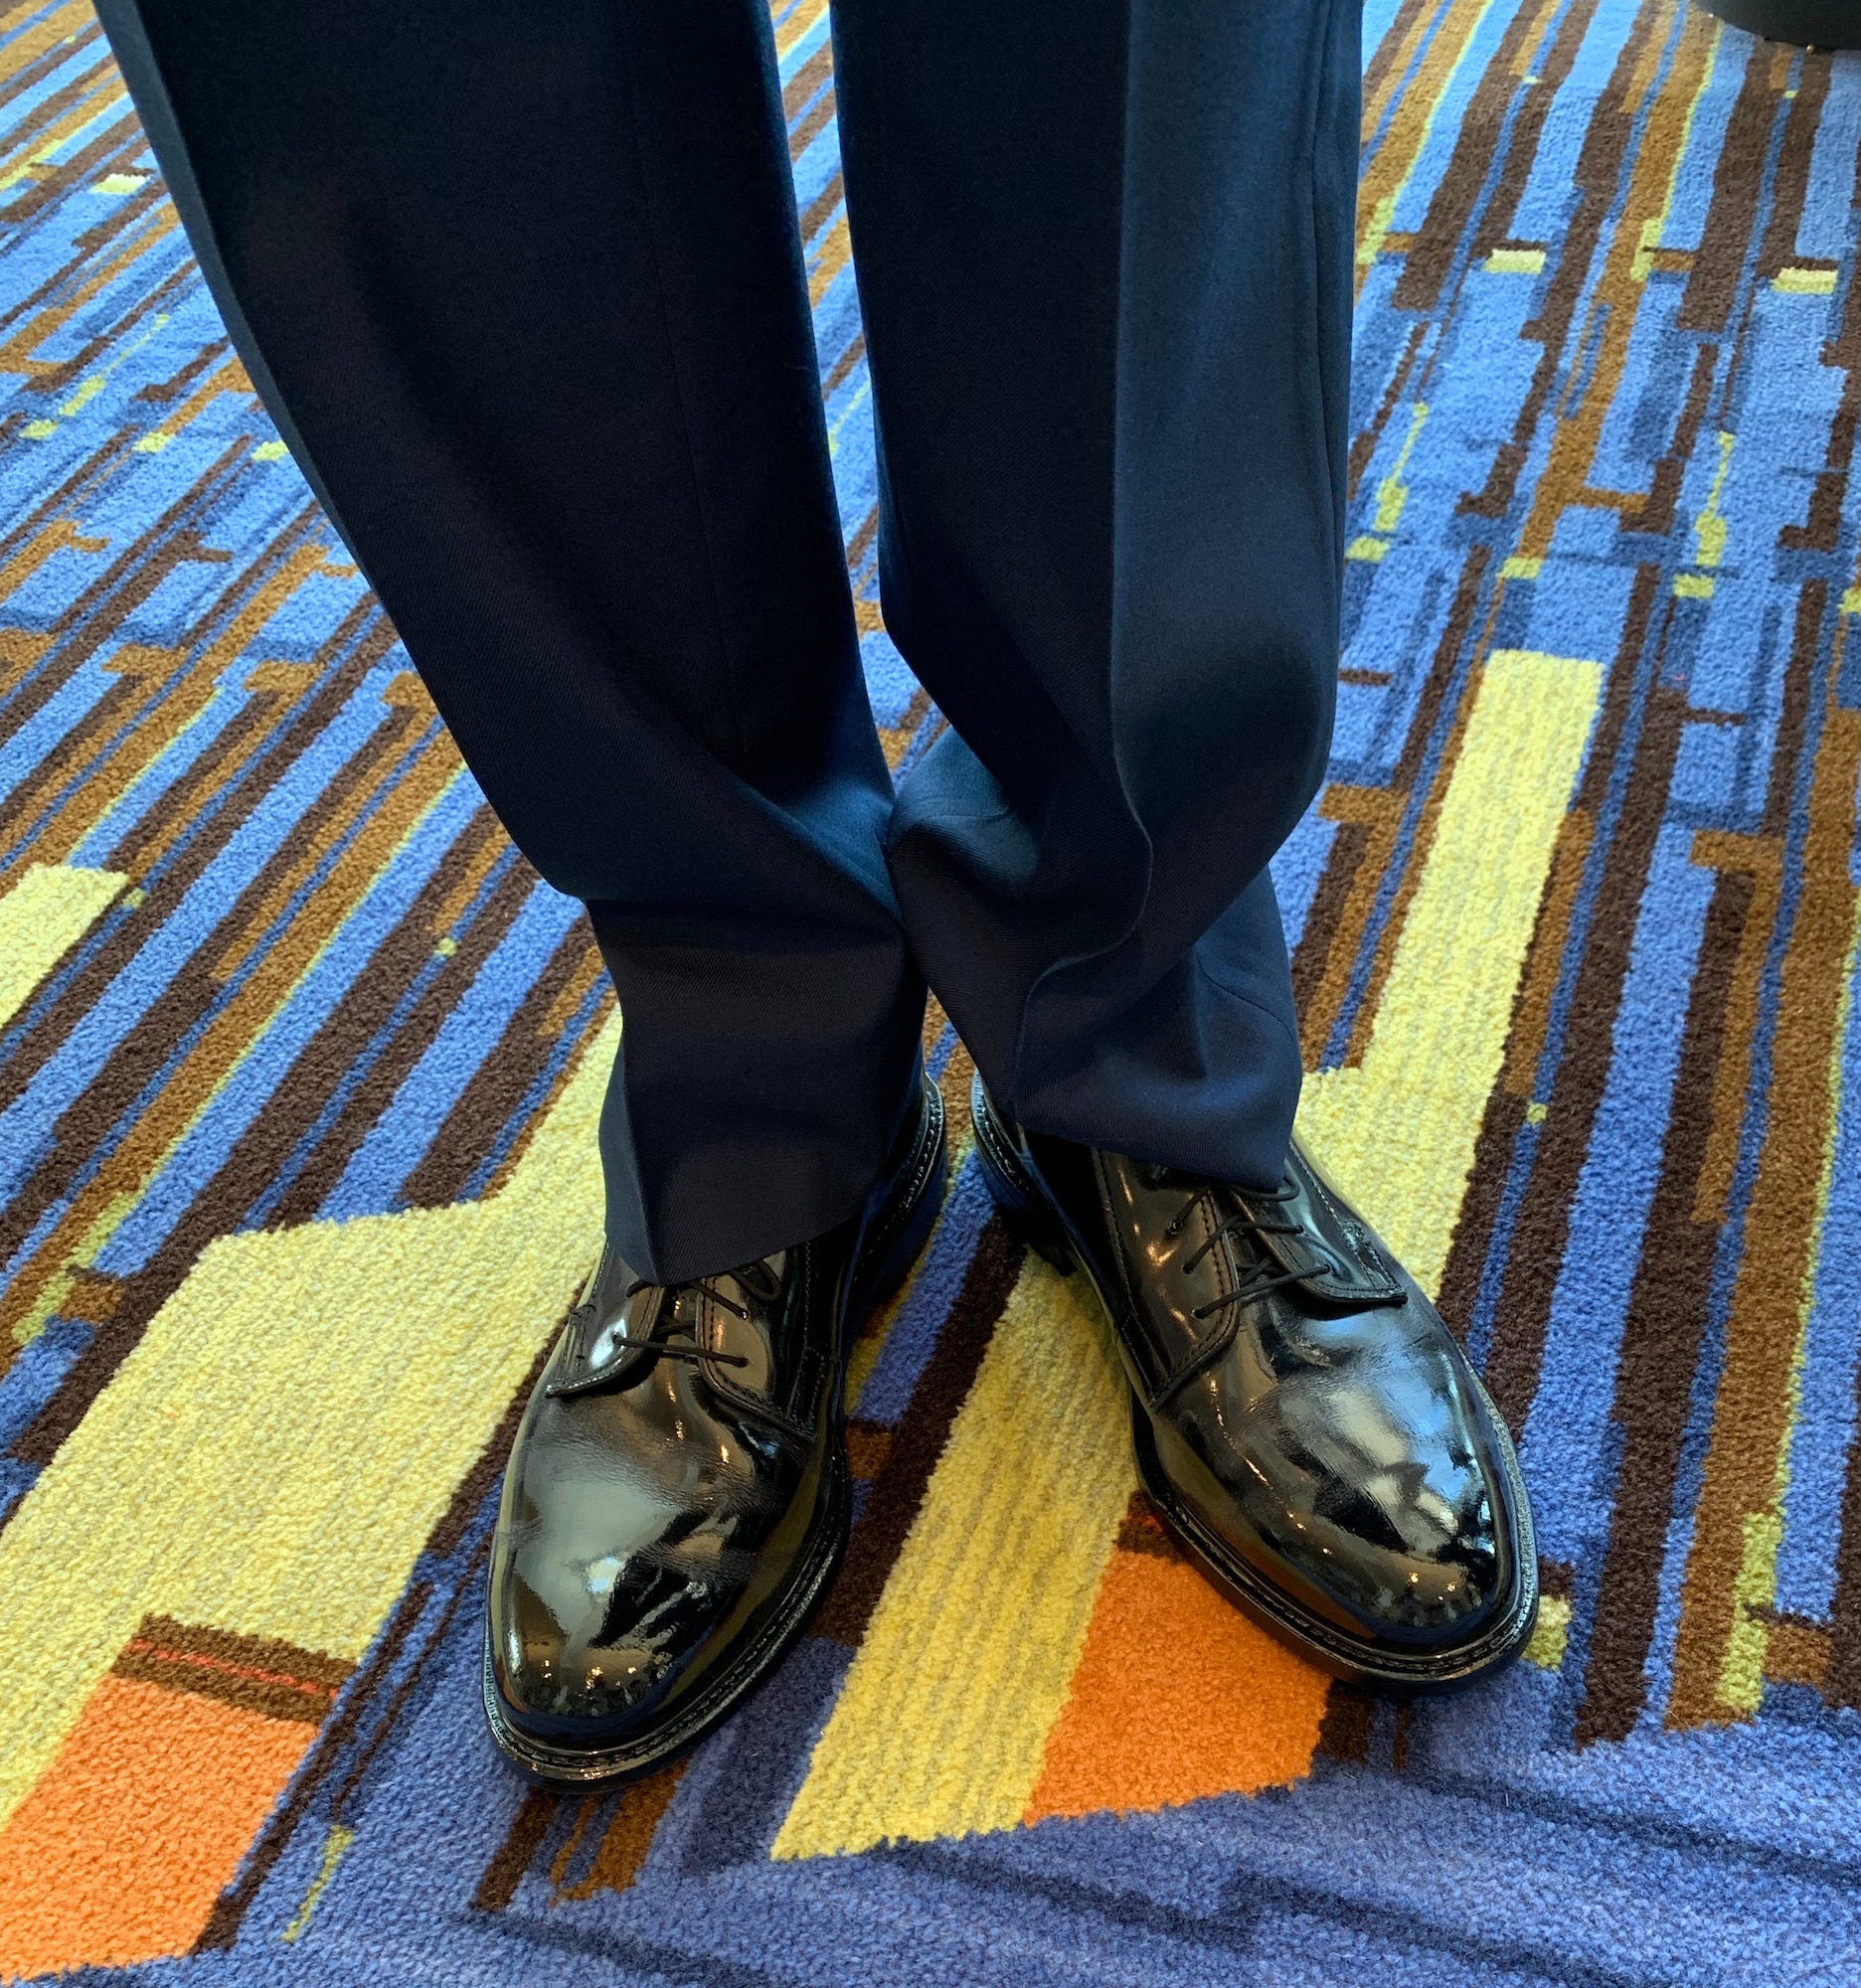 Air Force Junior ROTC Cadet Colton Moore, East Paulding High School, Ga., showcases his spit-shined dress shoes during the National High School Drill Team Competition May 3-5, 2019, at Daytona Beach, Fla. Cadet Moore took top honors and won the Demilitarized Armed Commander Trophy. Not only do cadets practice for hours after school on their drill performance, they also put in hours of work on every aspect of their uniform and personal grooming standards.